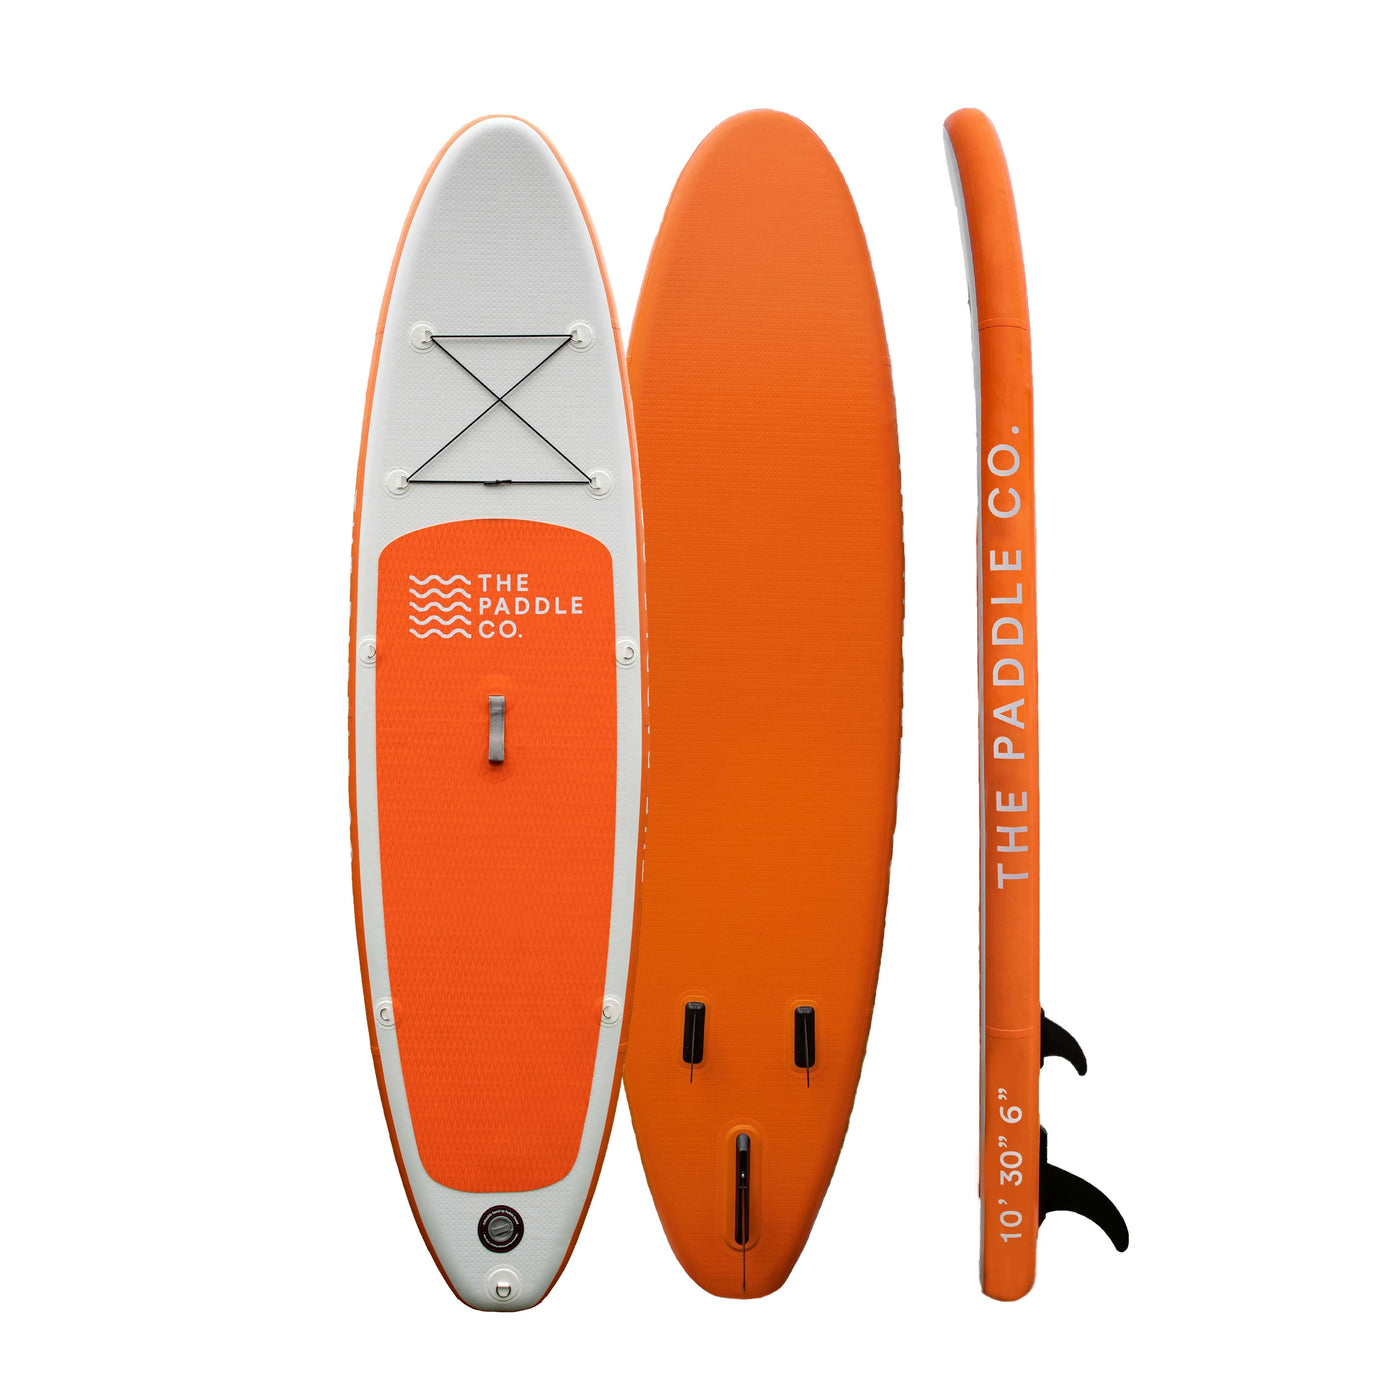 The Paddle Co. Original 10ft ISUP